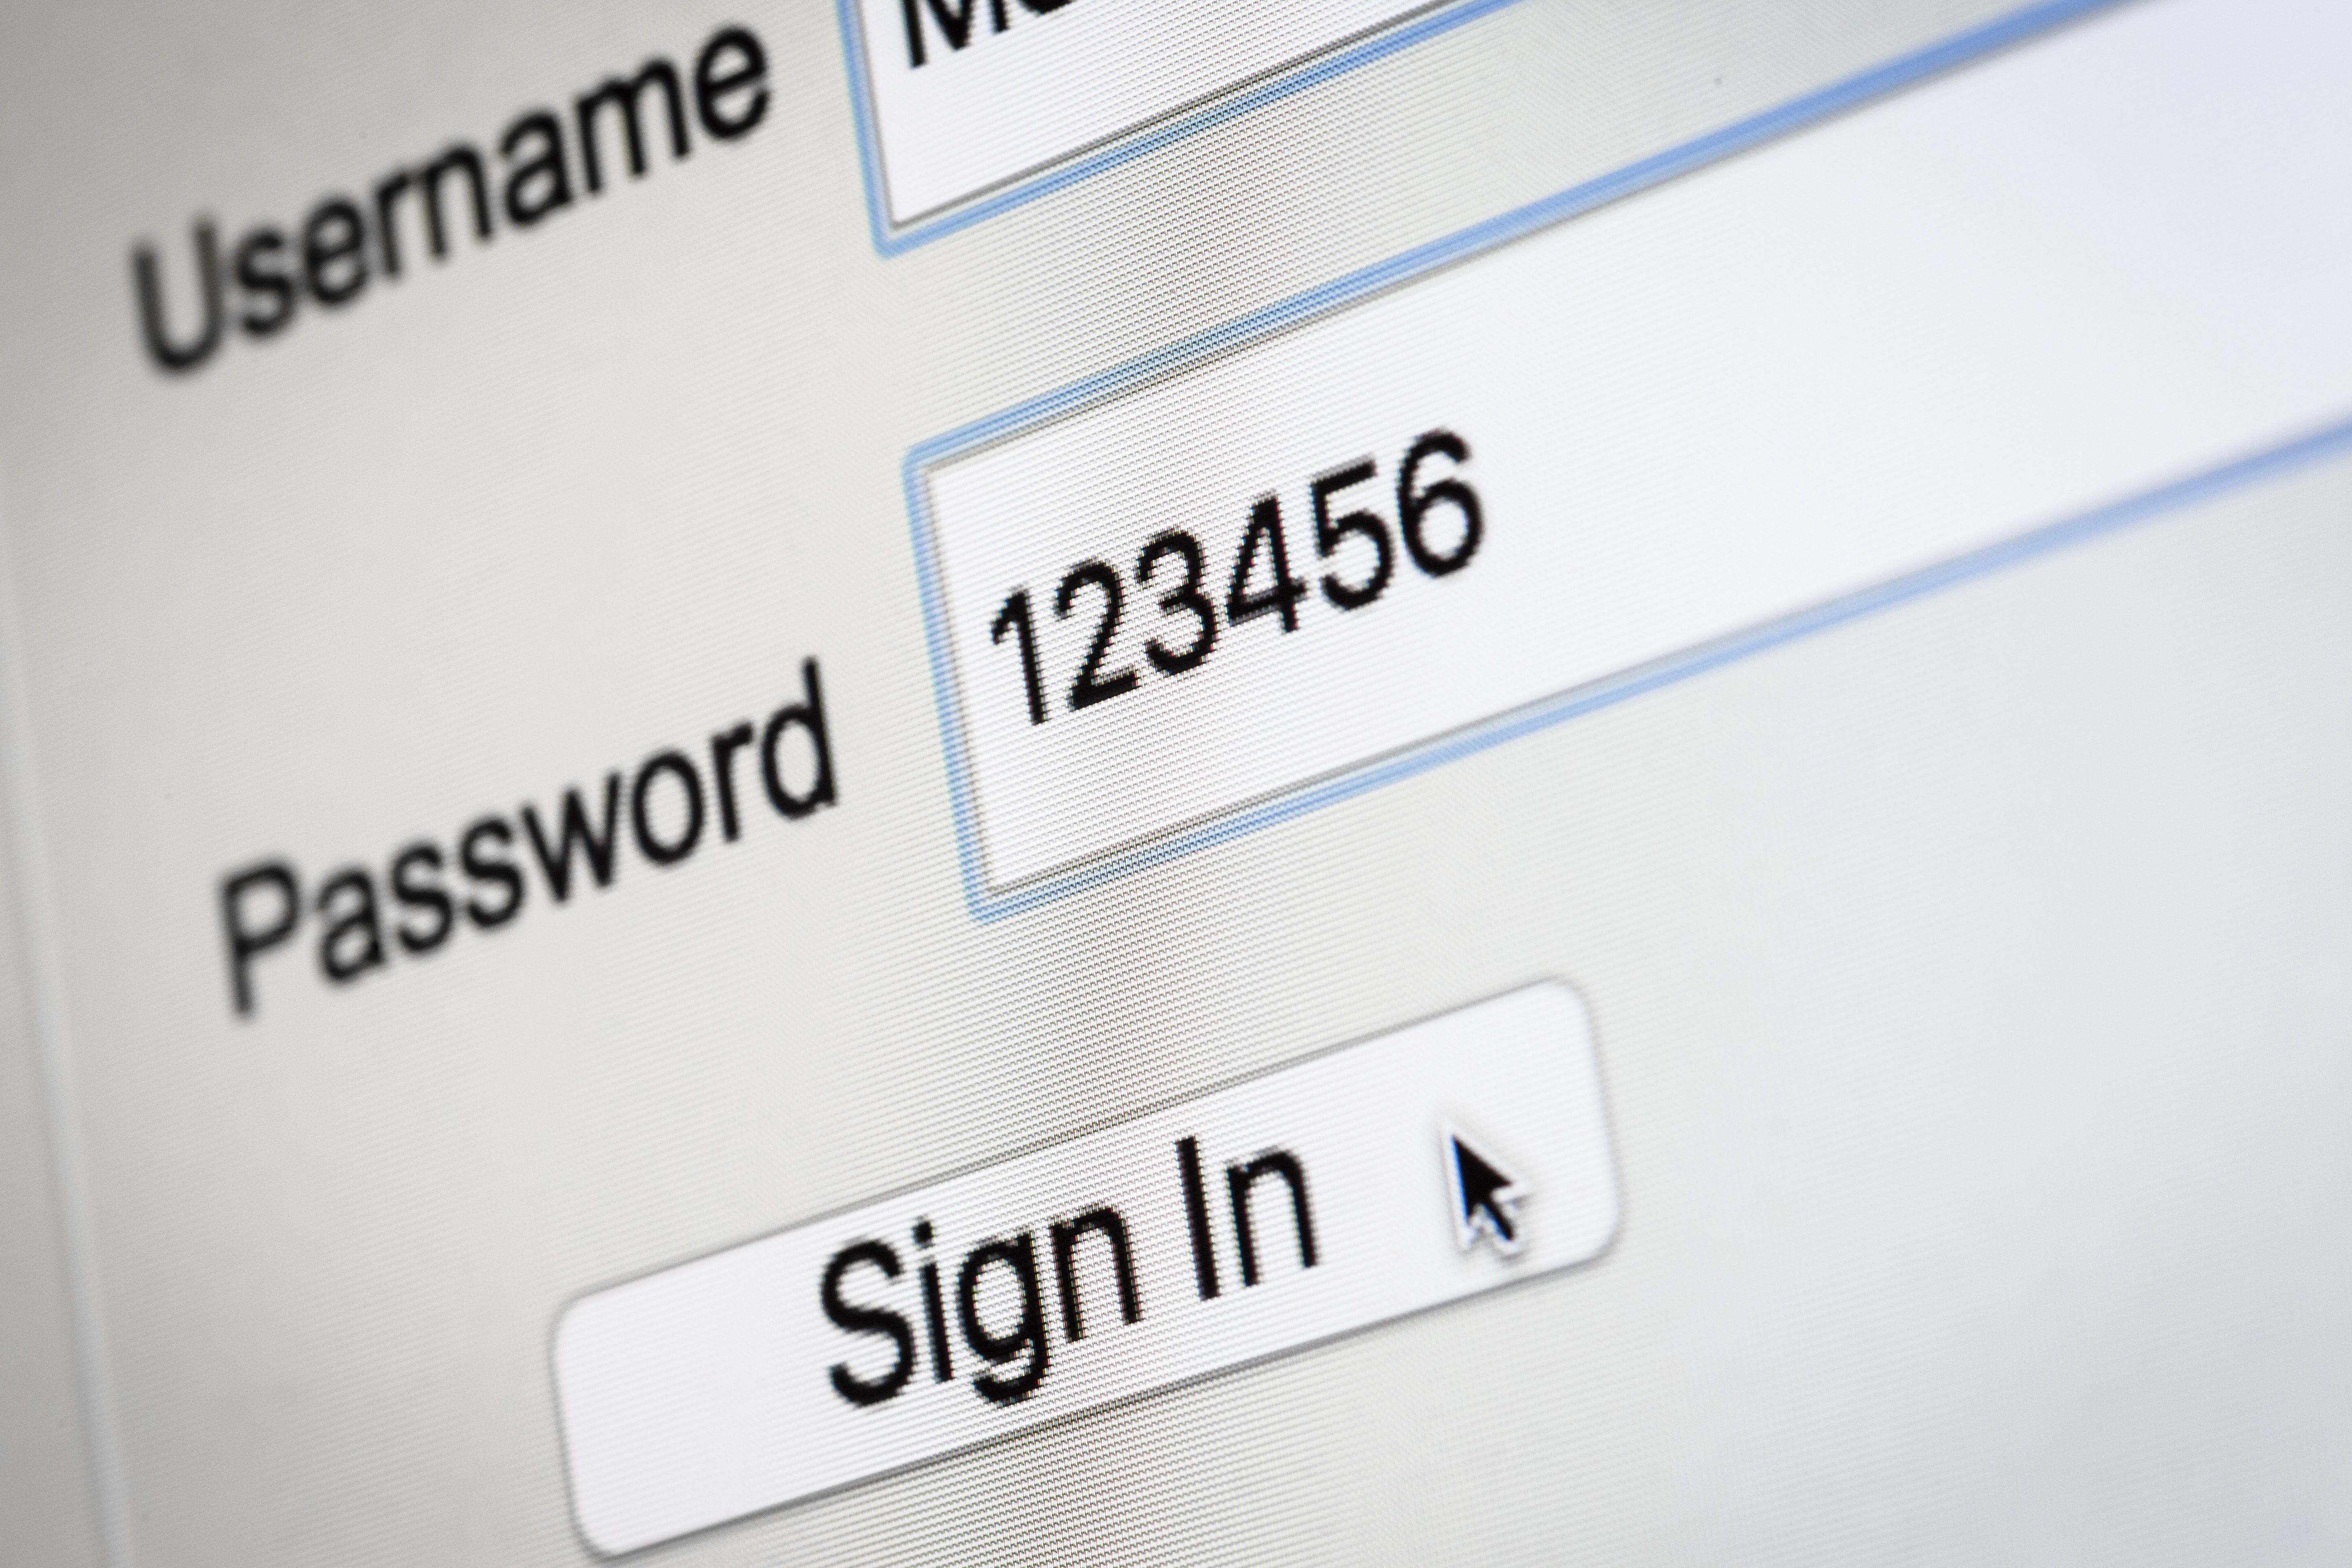 These Are The Weakest Passwords Of 2018 According To Experts